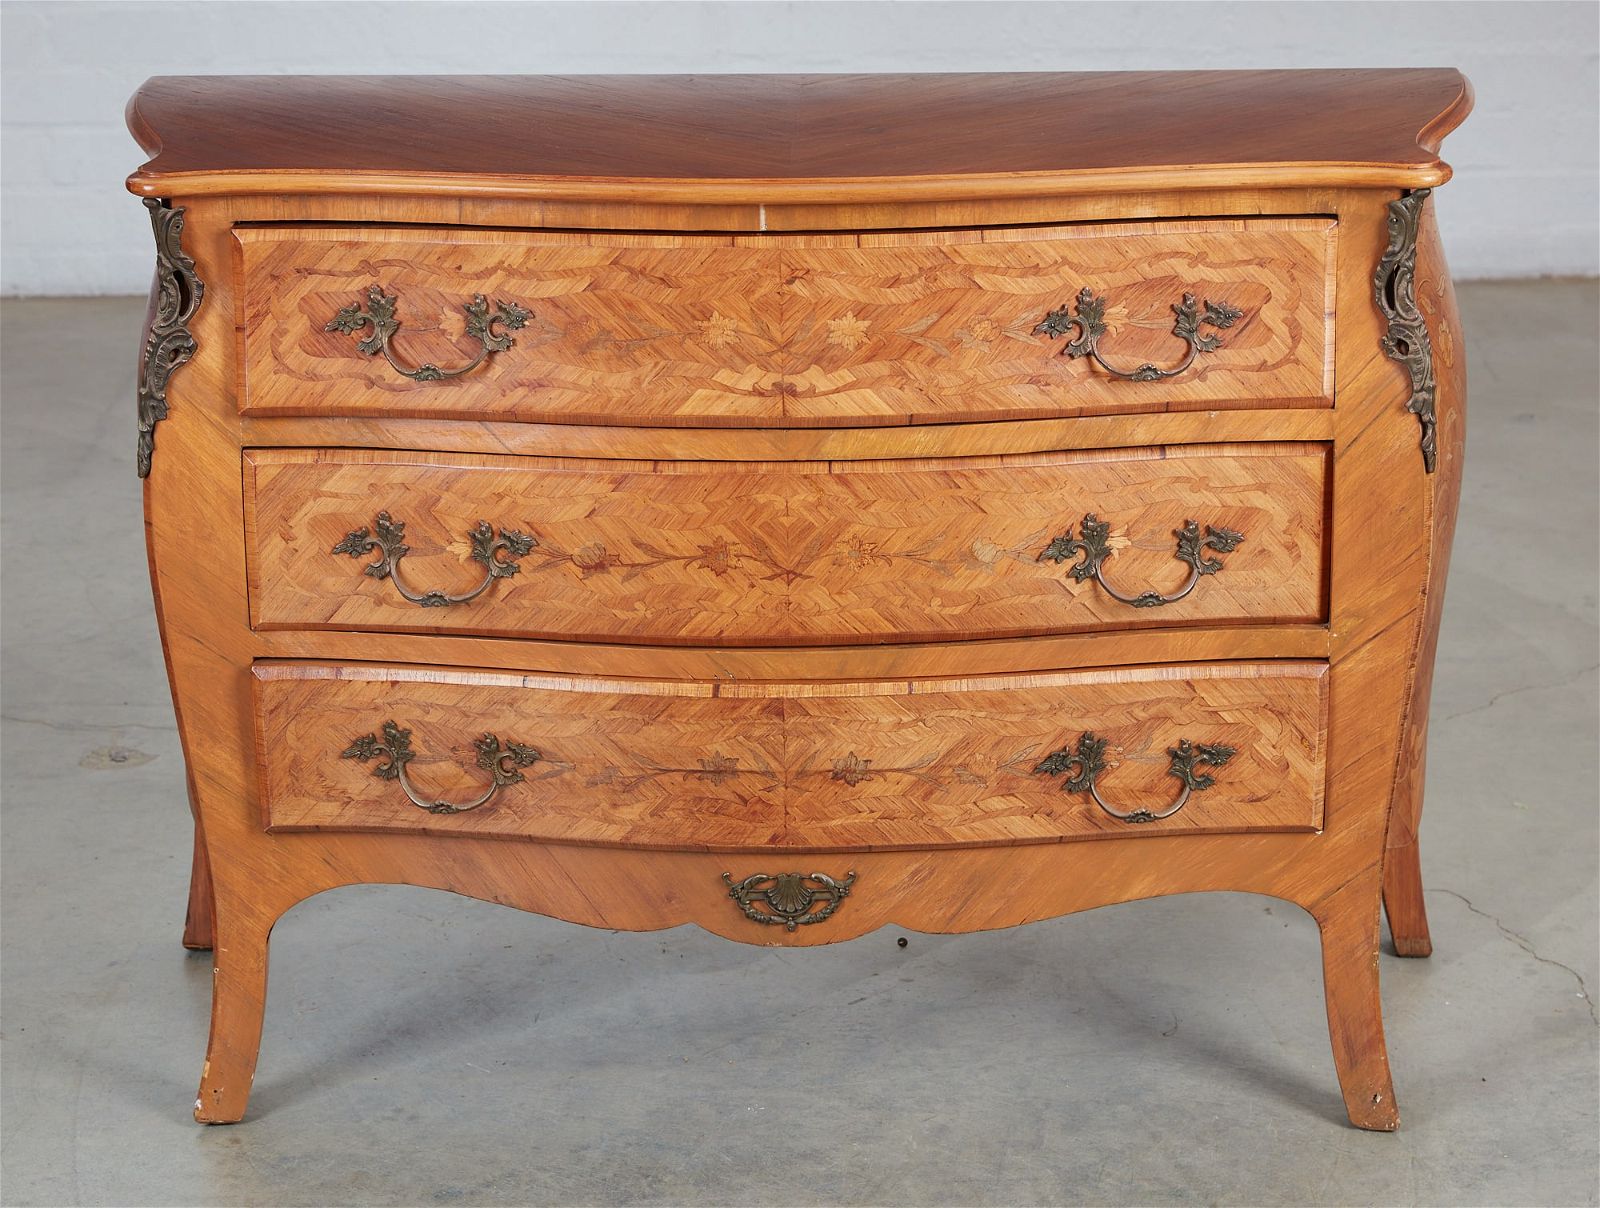 A LOUIS XV STYLE MARQUETRY INLAID 2fb3a1f